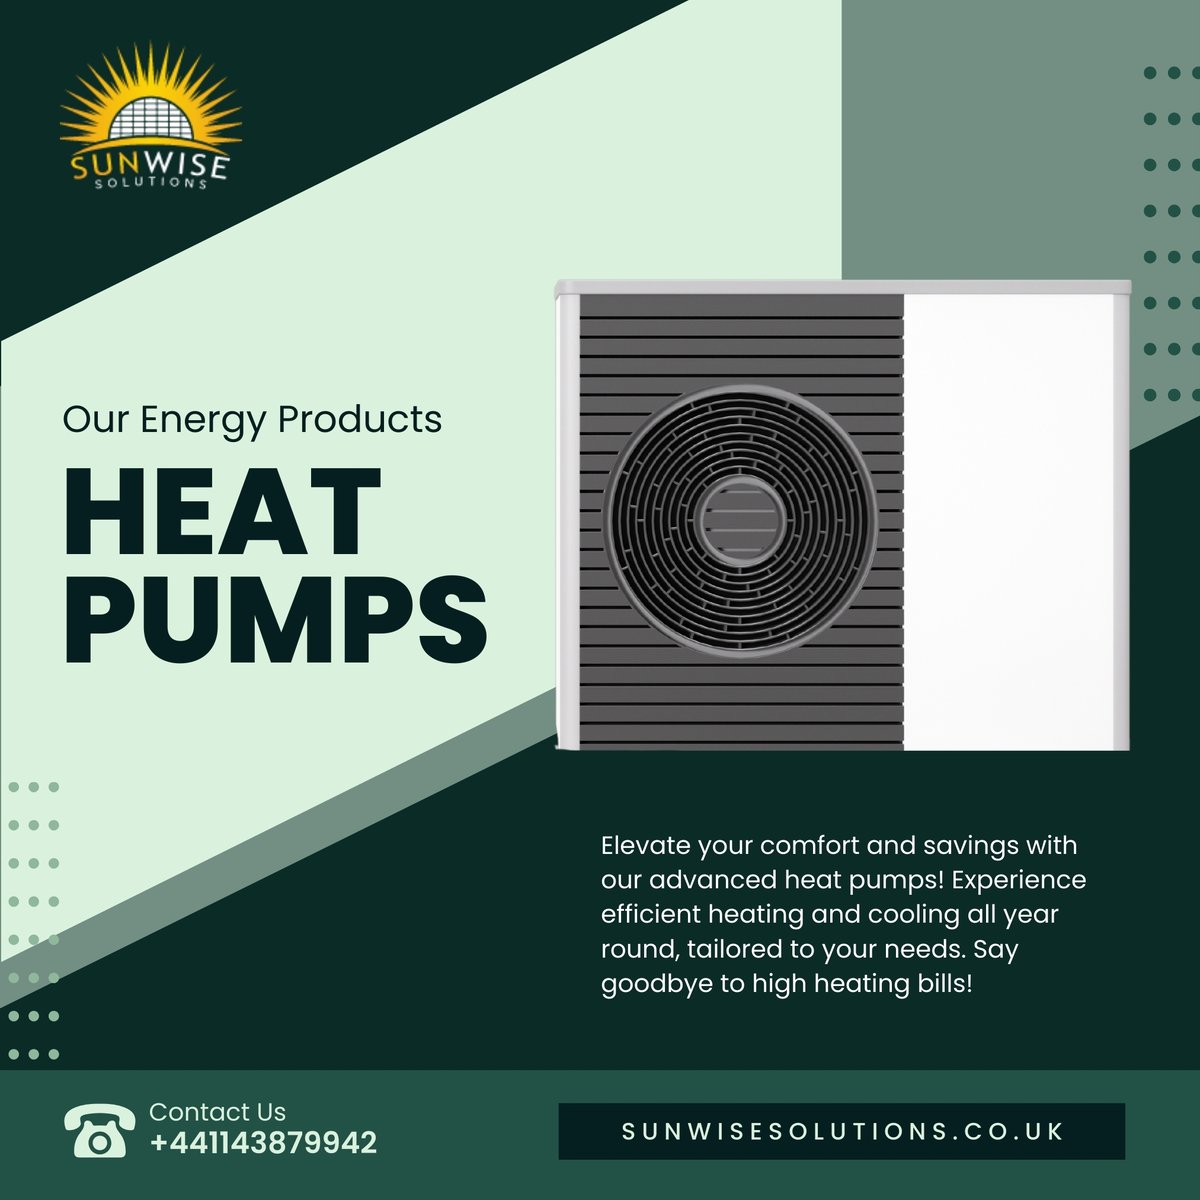 Upgrade your comfort game with our advanced heat pumps! 🌡️ Say goodbye to high heating bills and hello to year-round efficient heating and cooling tailored just for you. 

#EnergyEfficiency #HeatPumps'